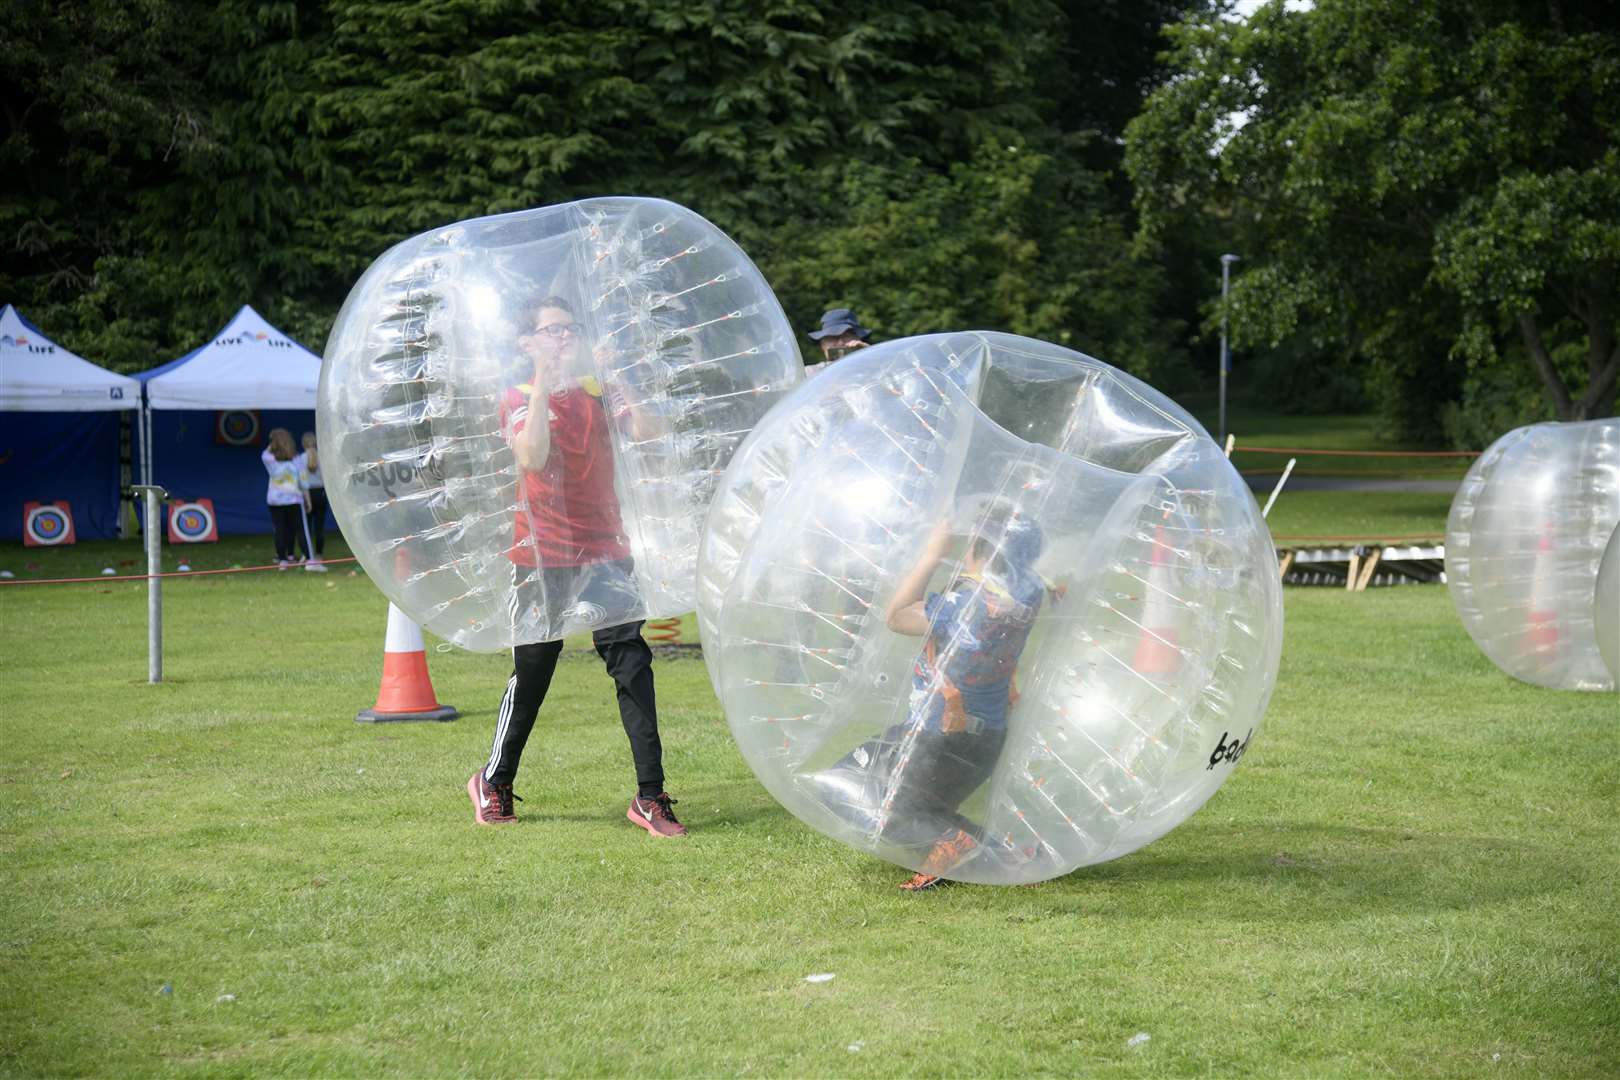 Inflatable body zorbs will be one of the activities at the active family fun day. Picture: Beth Taylor